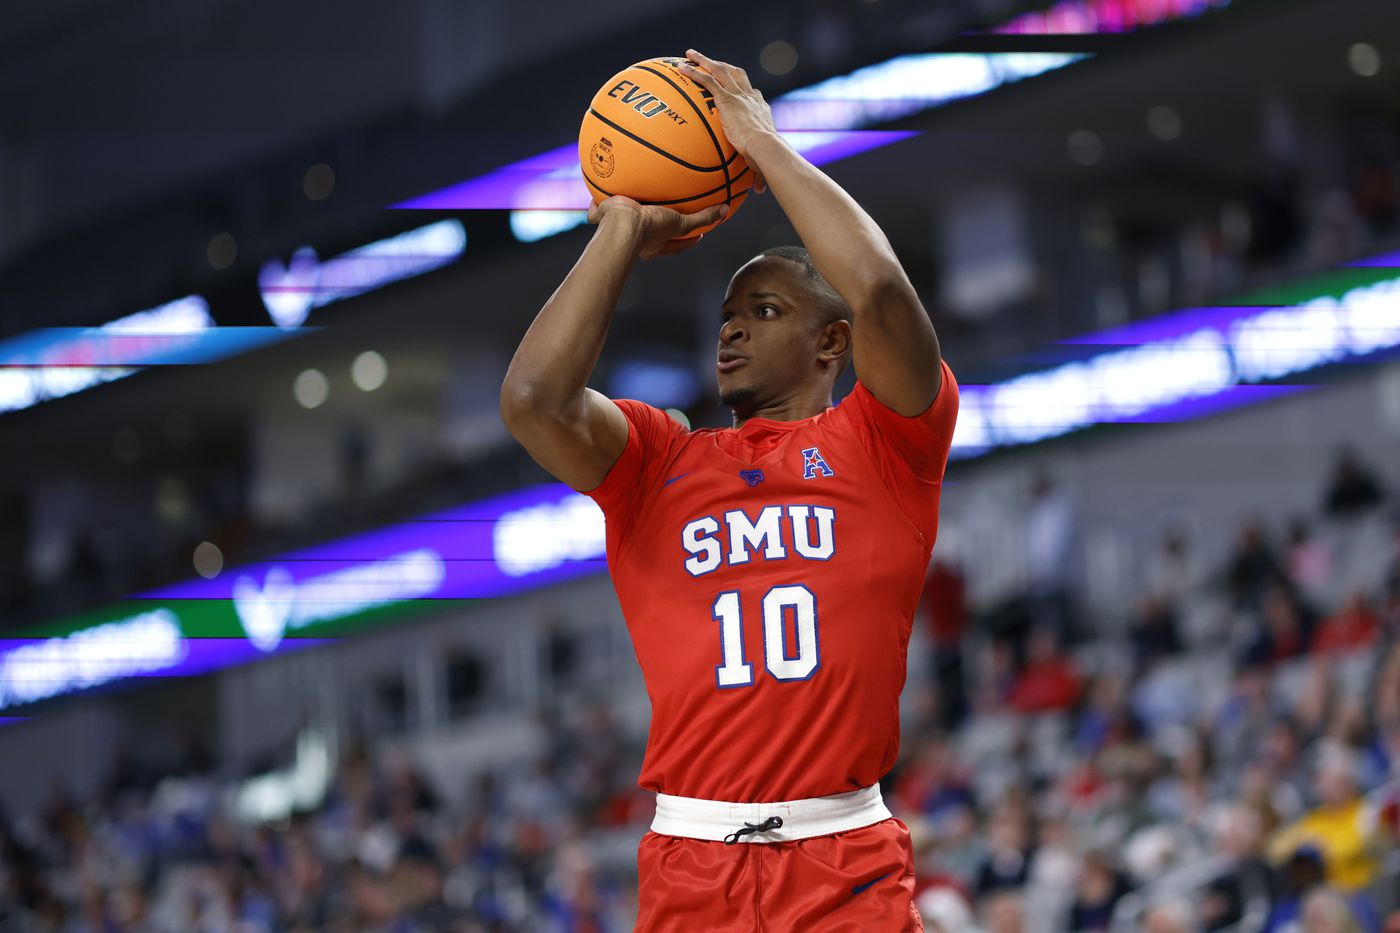 NIT bracket: WSU will face SMU in second round - CougCenter